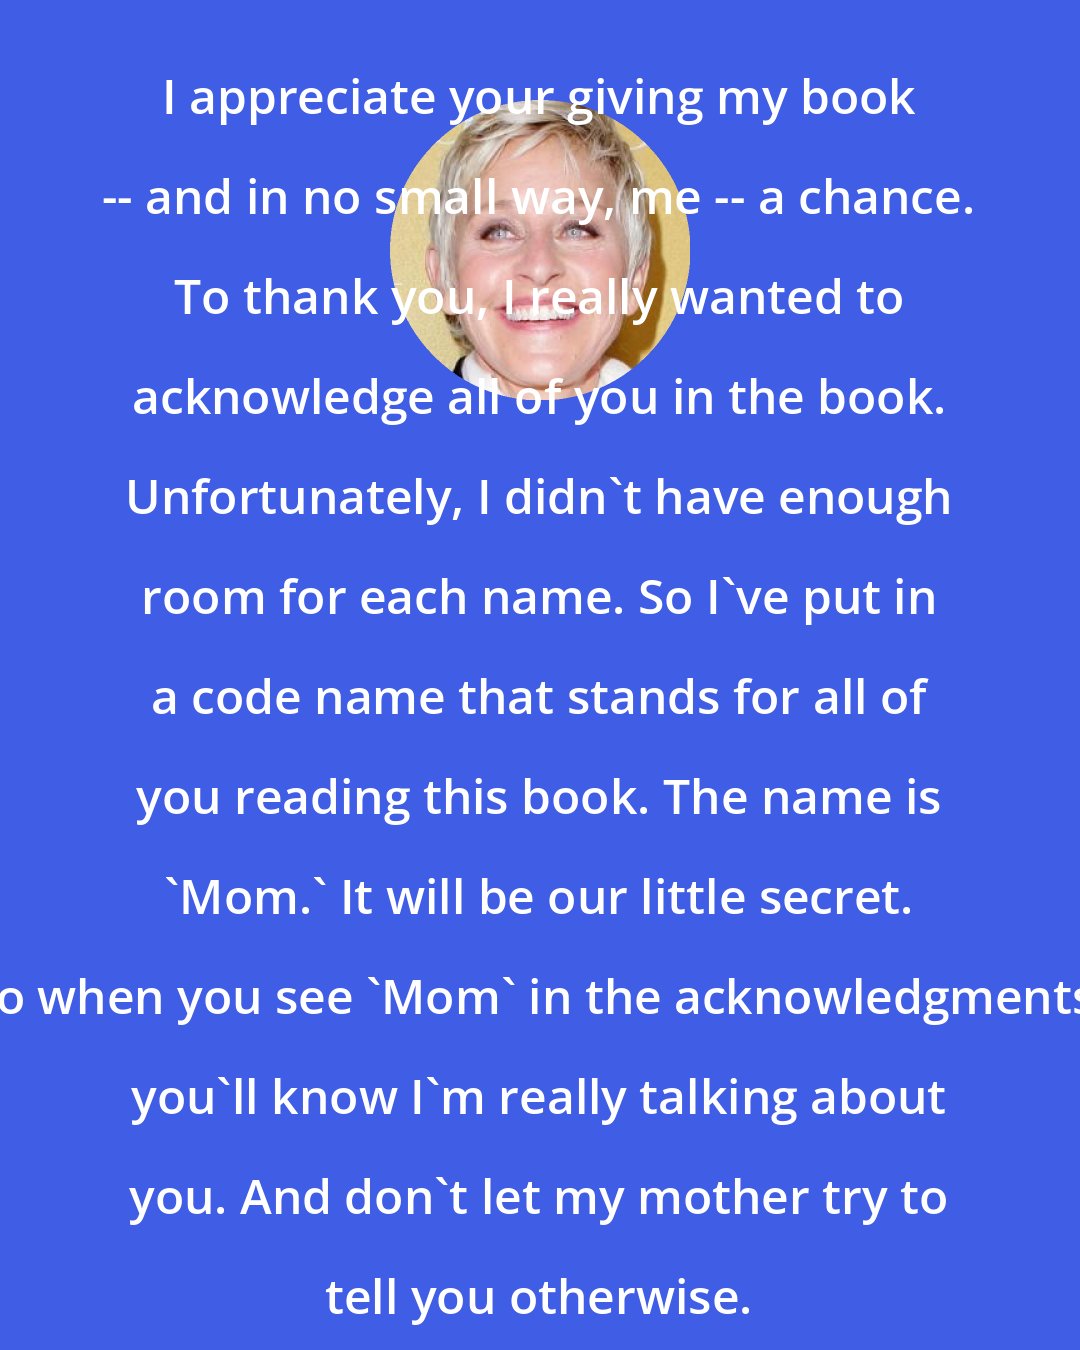 Ellen DeGeneres: I appreciate your giving my book -- and in no small way, me -- a chance. To thank you, I really wanted to acknowledge all of you in the book. Unfortunately, I didn't have enough room for each name. So I've put in a code name that stands for all of you reading this book. The name is 'Mom.' It will be our little secret. So when you see 'Mom' in the acknowledgments, you'll know I'm really talking about you. And don't let my mother try to tell you otherwise.